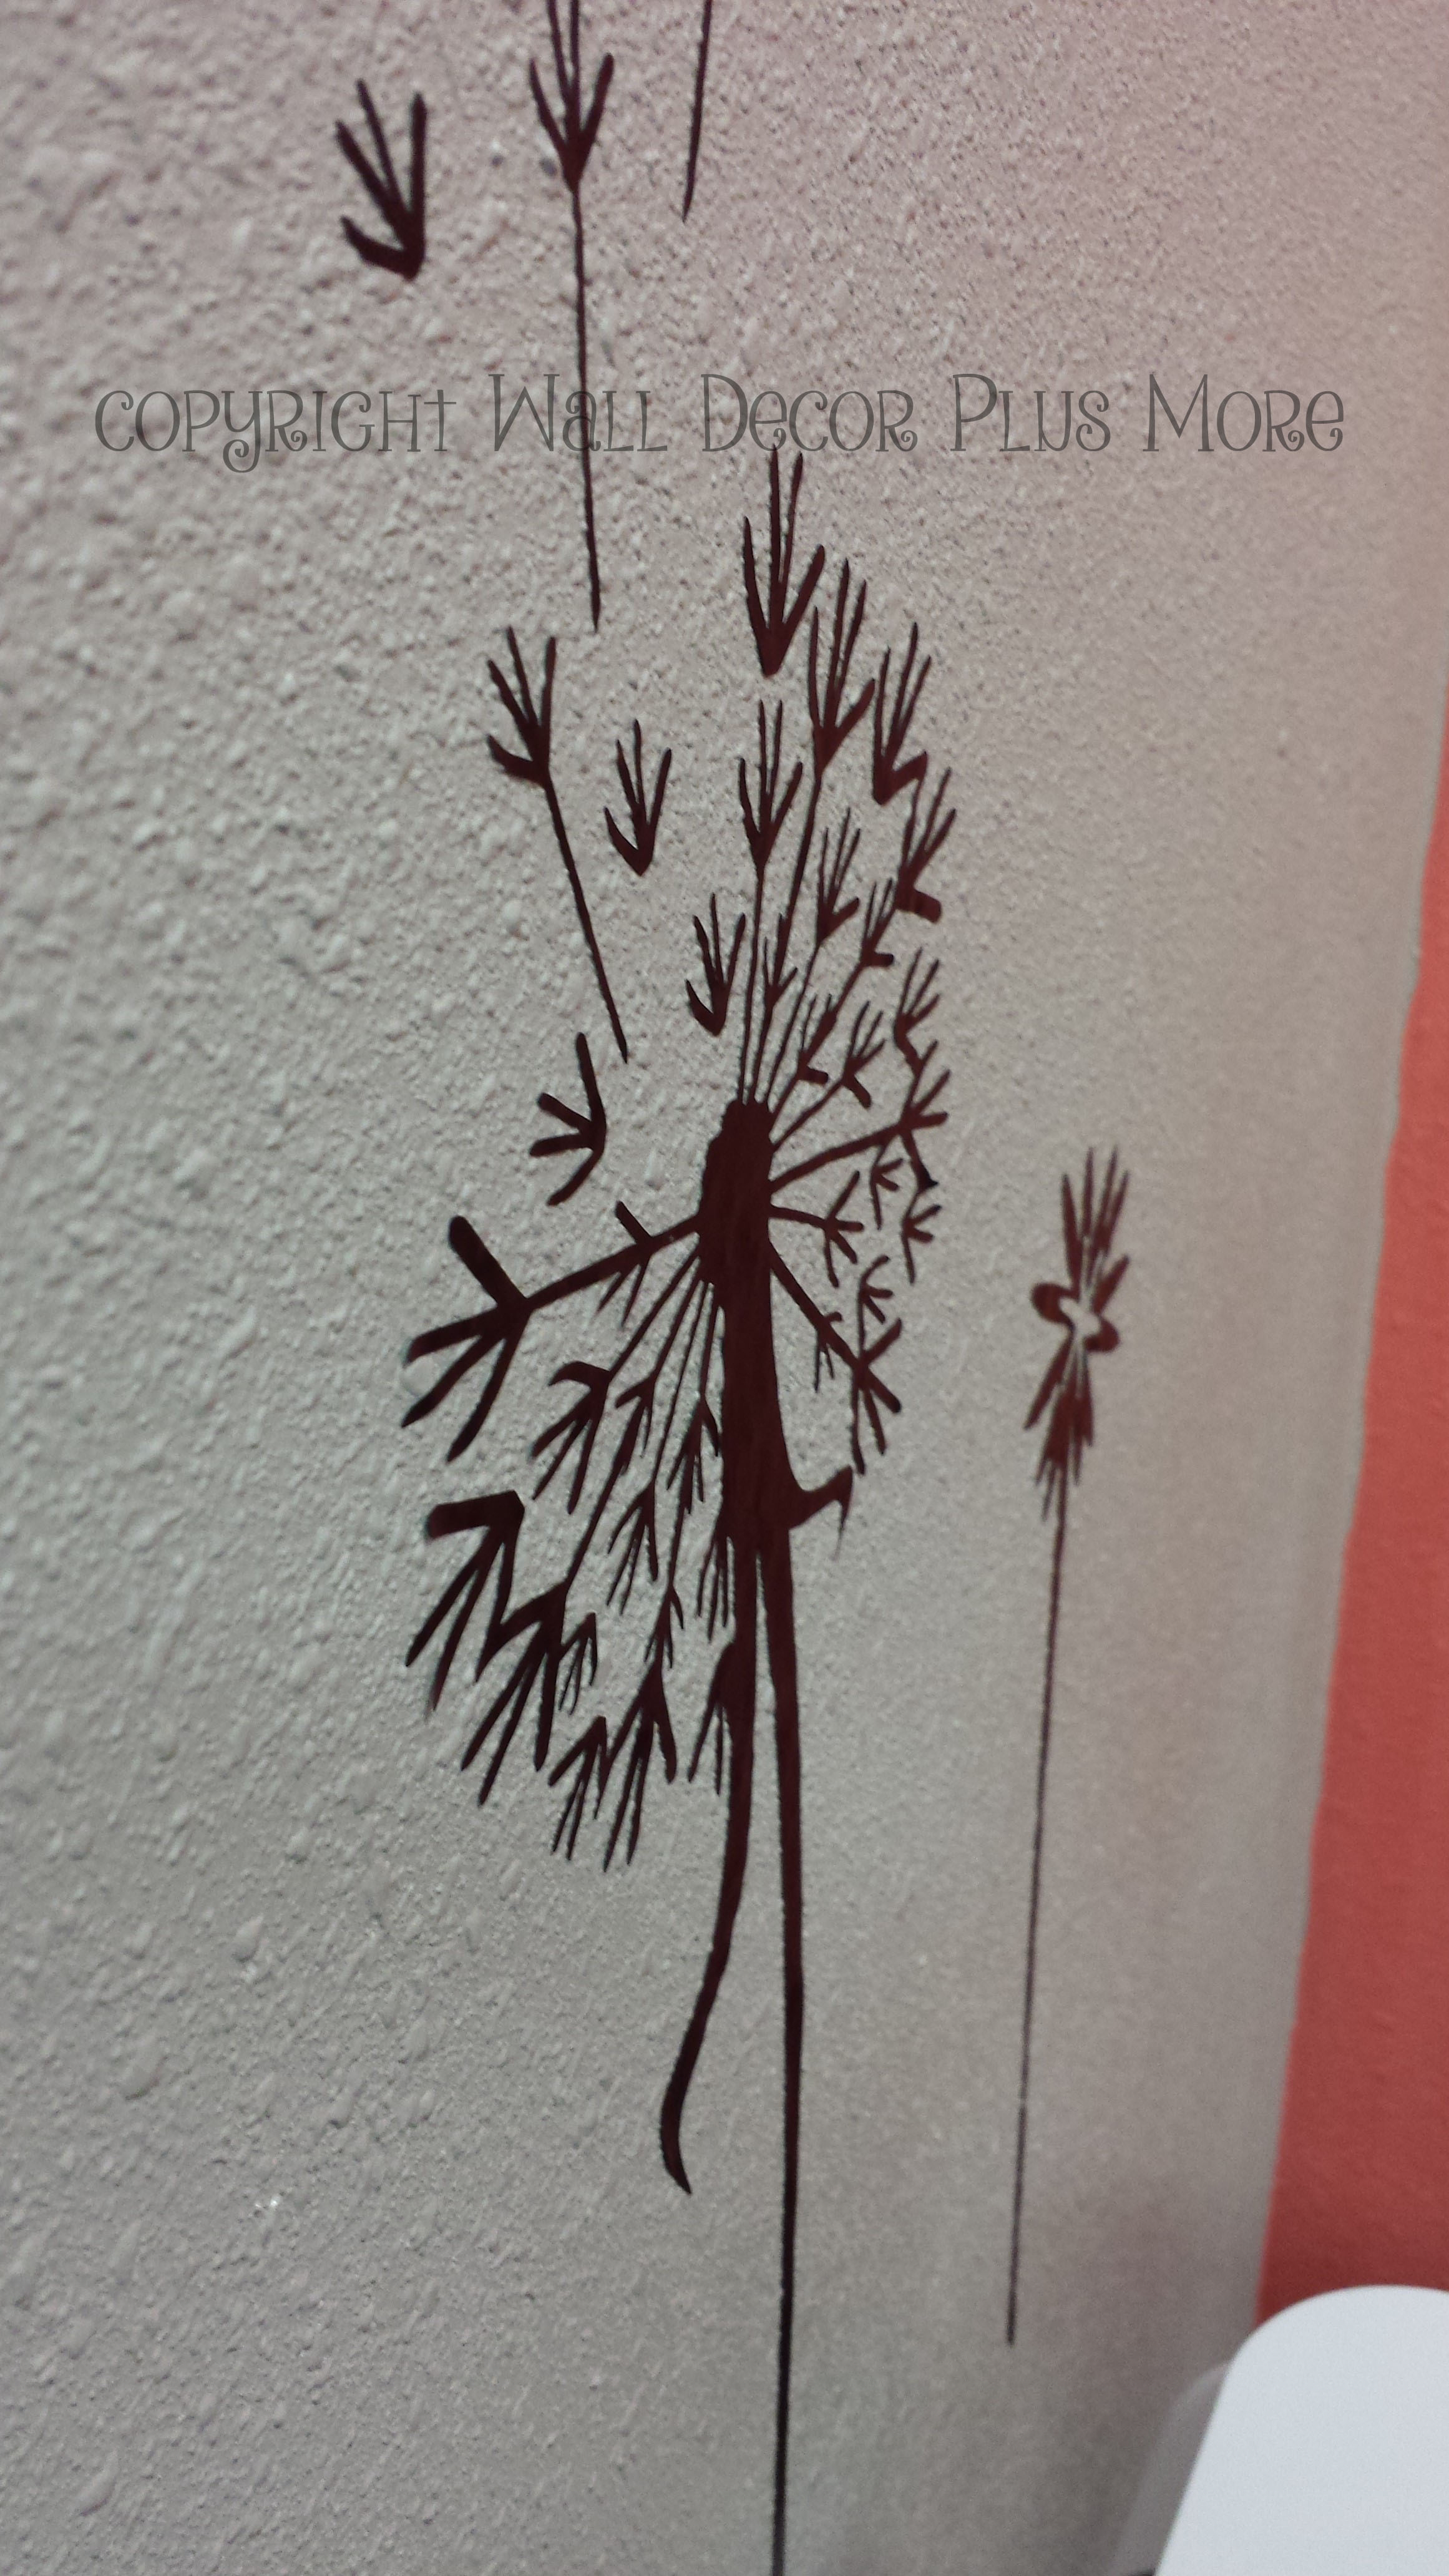 New Wall Decal Vinyl Material shown in Dandelion Wall Decals